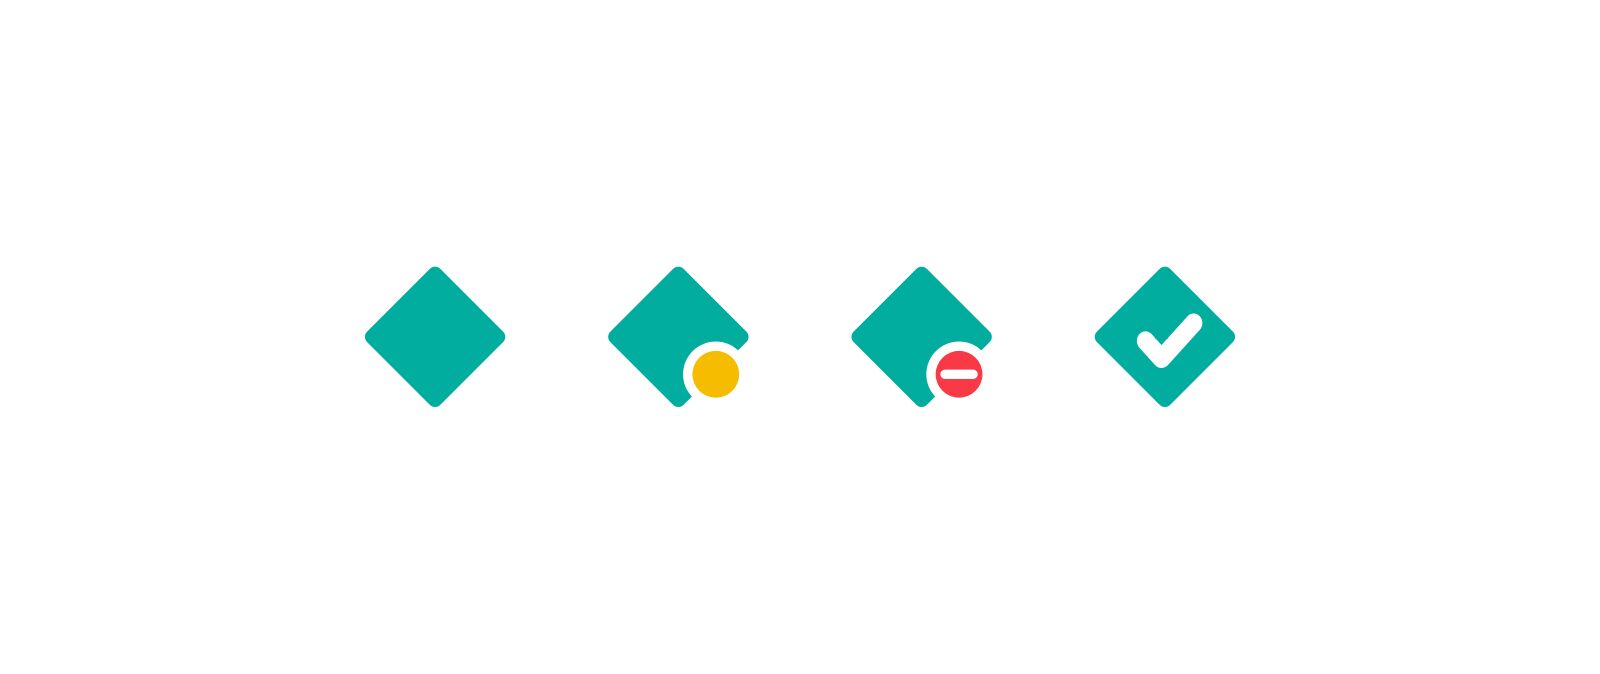 4 versions of the favicon: 1. A simplified version of the Netlify logo – a teal square rotated 45 degrees. 2. Simplified logo with a yellow circle. 3. Simplified logo with a red circle with a white line through it. 4. Simplified logo with a checkmark.